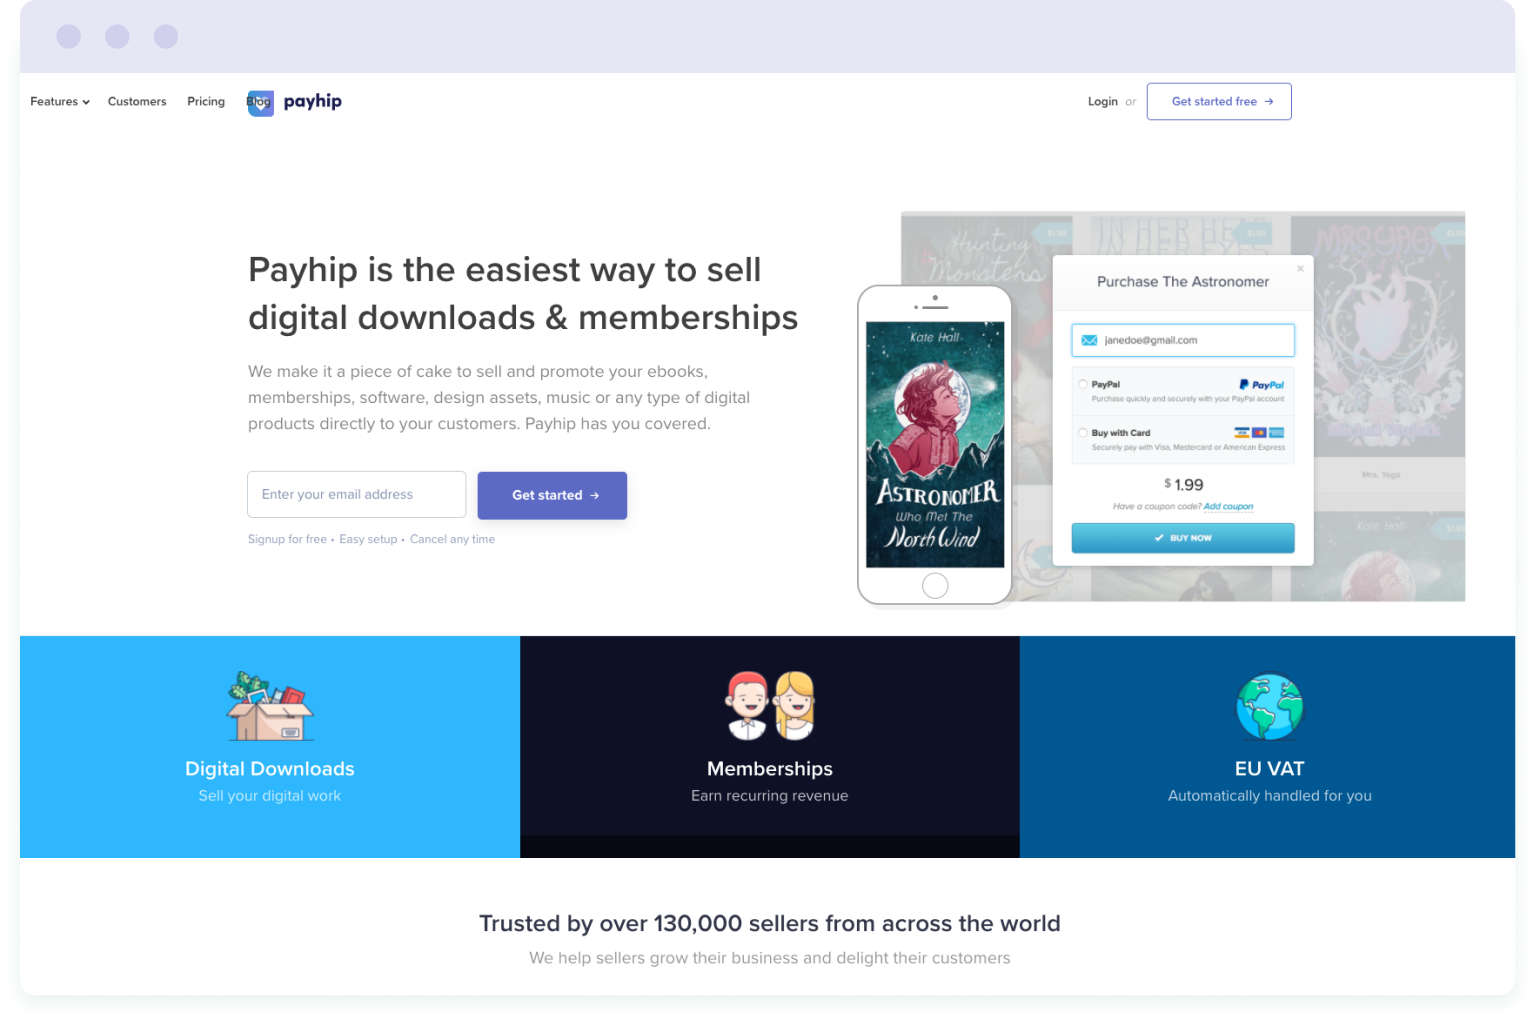 Image of Payhip website homepage